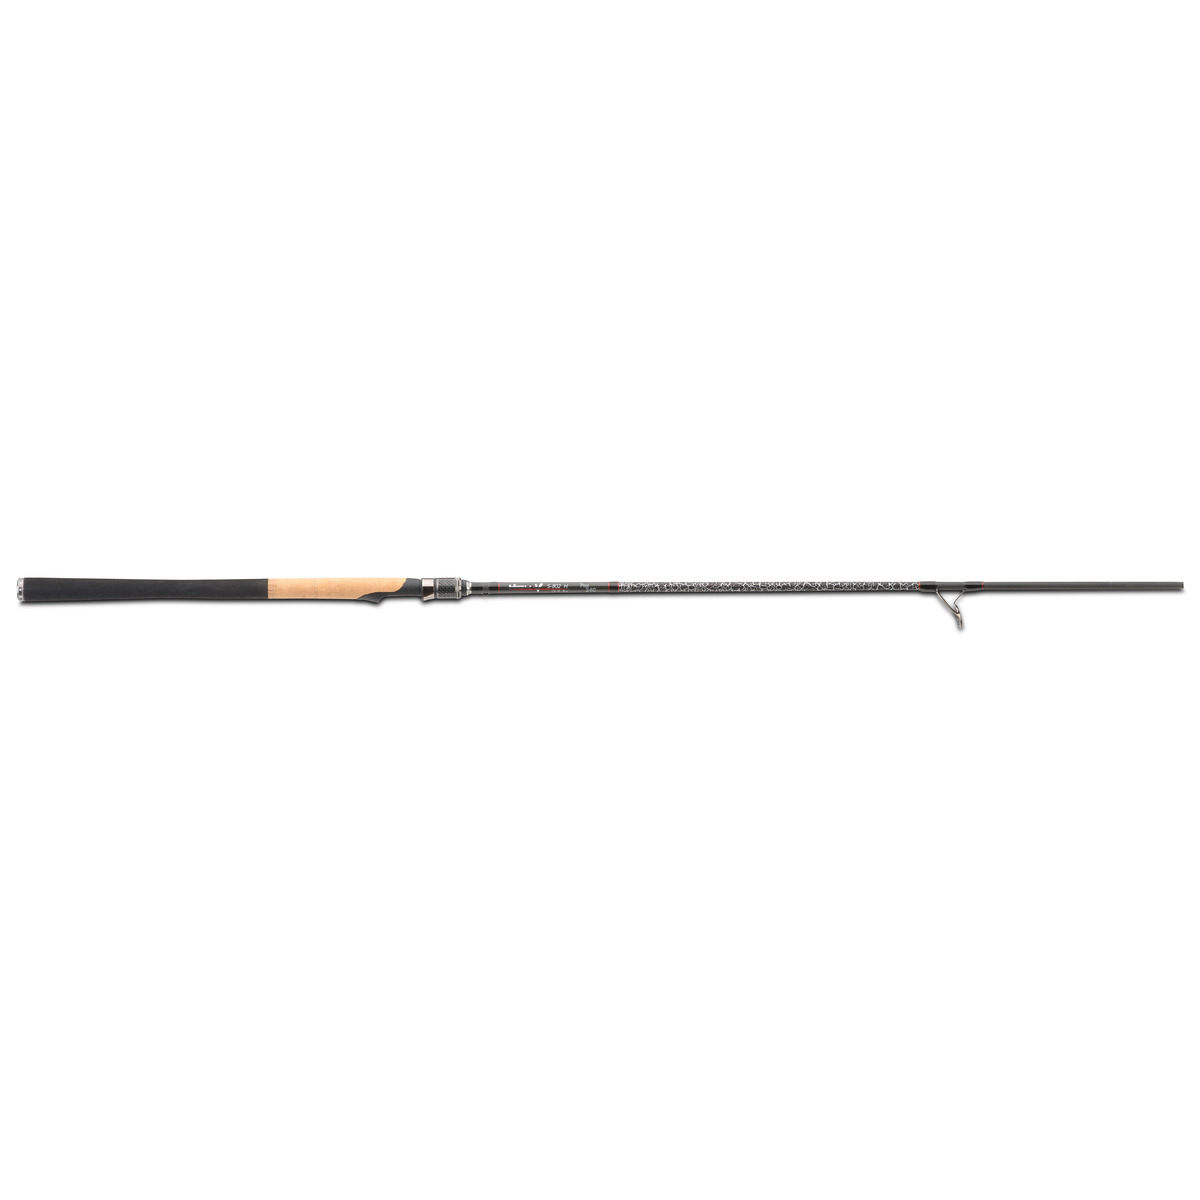 Iron Claw High-v Pike - S-802H Pike 2,40m 28-90 g g